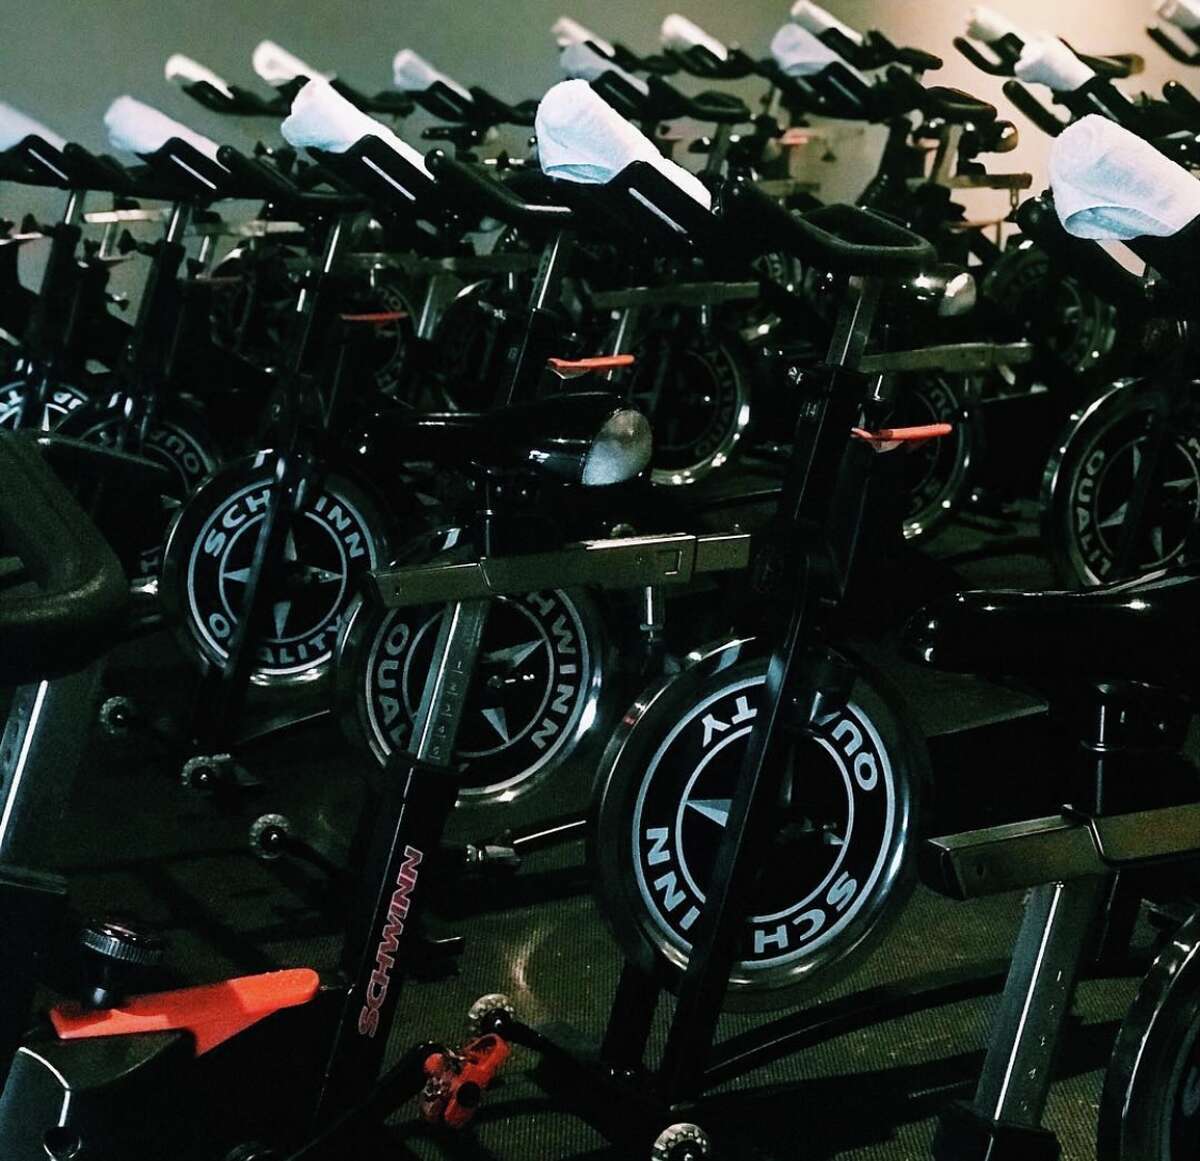 Revolution Cycling Studio announced its permanently closing its doors. 